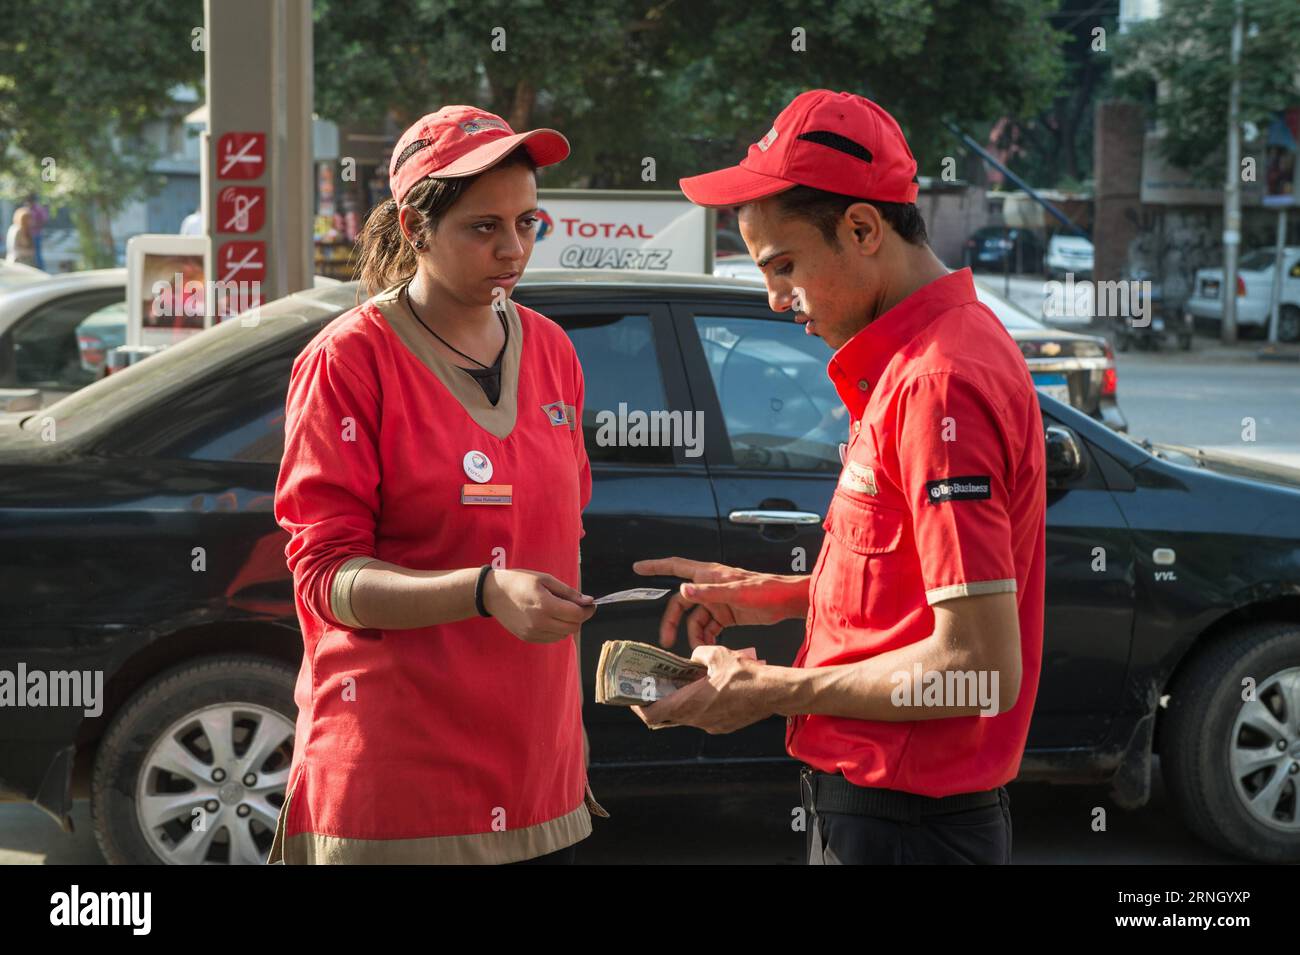 Ägypten - Weibliche Arbeitskräfte an einer Tankstelle in Kairo (161018) -- CAIRO, Oct. 18, 2016 -- Female and male employees work together at a gas station in Maadi district of Cairo, Egypt, Oct. 17, 2016. Dressed in red buttonless shirt and black pants uniform, 24-year-old veiled Hadeer Ashraf looked confident and swift while holding the fuel pump nozzle gun to serve the vehicles lined up at Total gas station near the Nile Corniche Street in Maadi district southwestern the Egyptian capital city of Cairo. ) (yk) EGYPT-CAIRO-GAS STATION-FEMALE WORKERS MengxTao PUBLICATIONxNOTxINxCHN   Egypt Fem Stock Photo